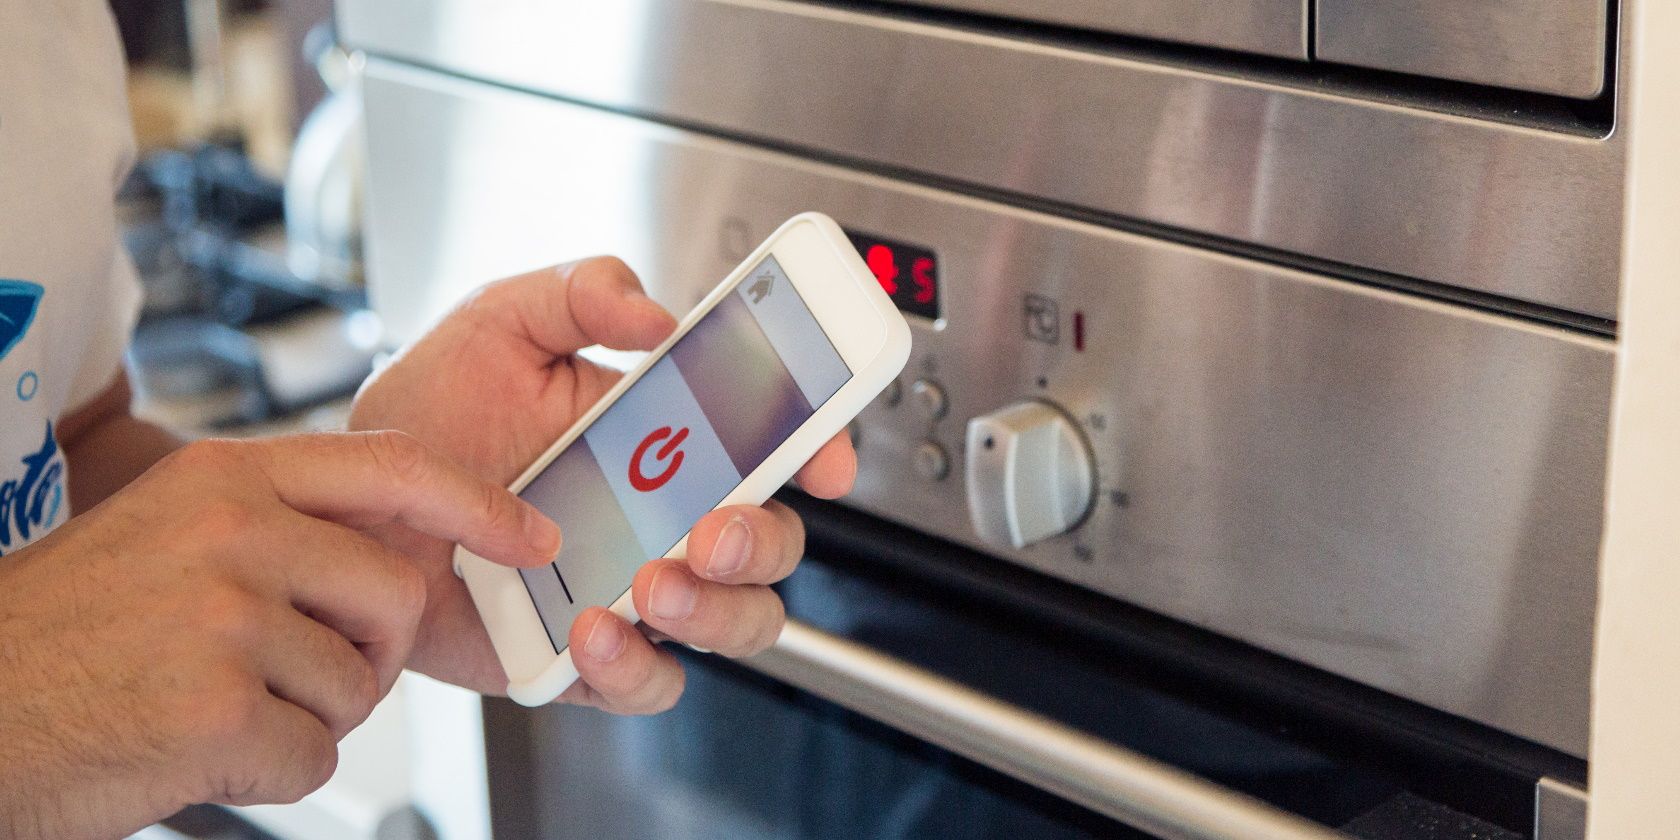 The Best Smart Ovens for Everyday Cooking